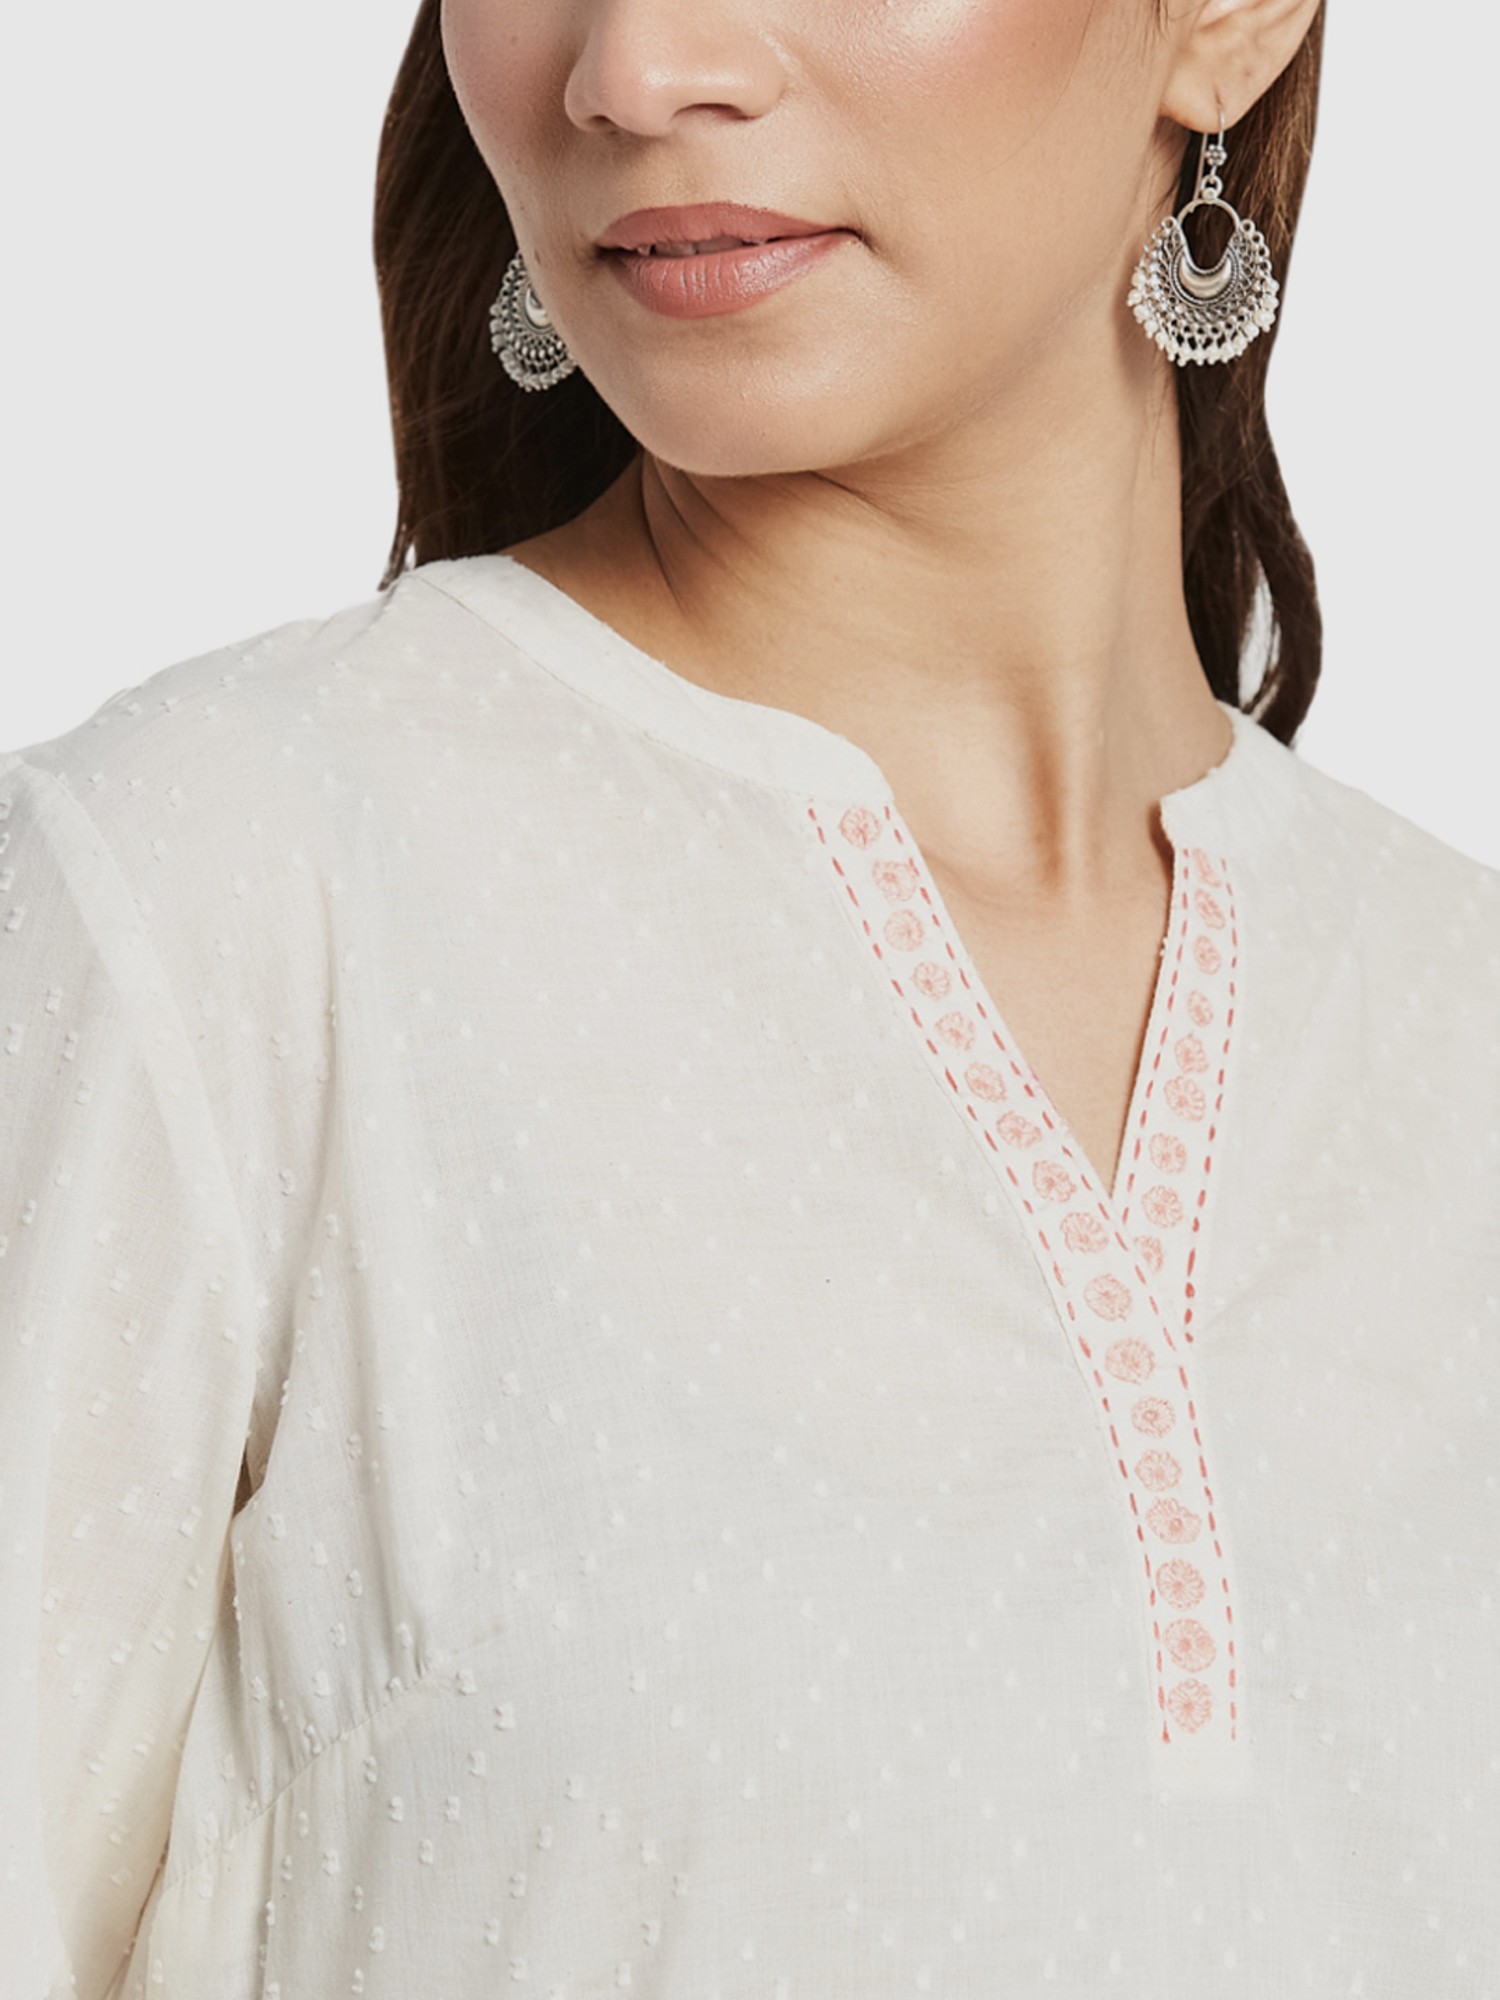 Buy Lucknowi noor Women's Cotton Full Sleeves Beautiful Chikan Embroidery  Work on Neck Design Short Kurti (LN-152, White, 42) at Amazon.in